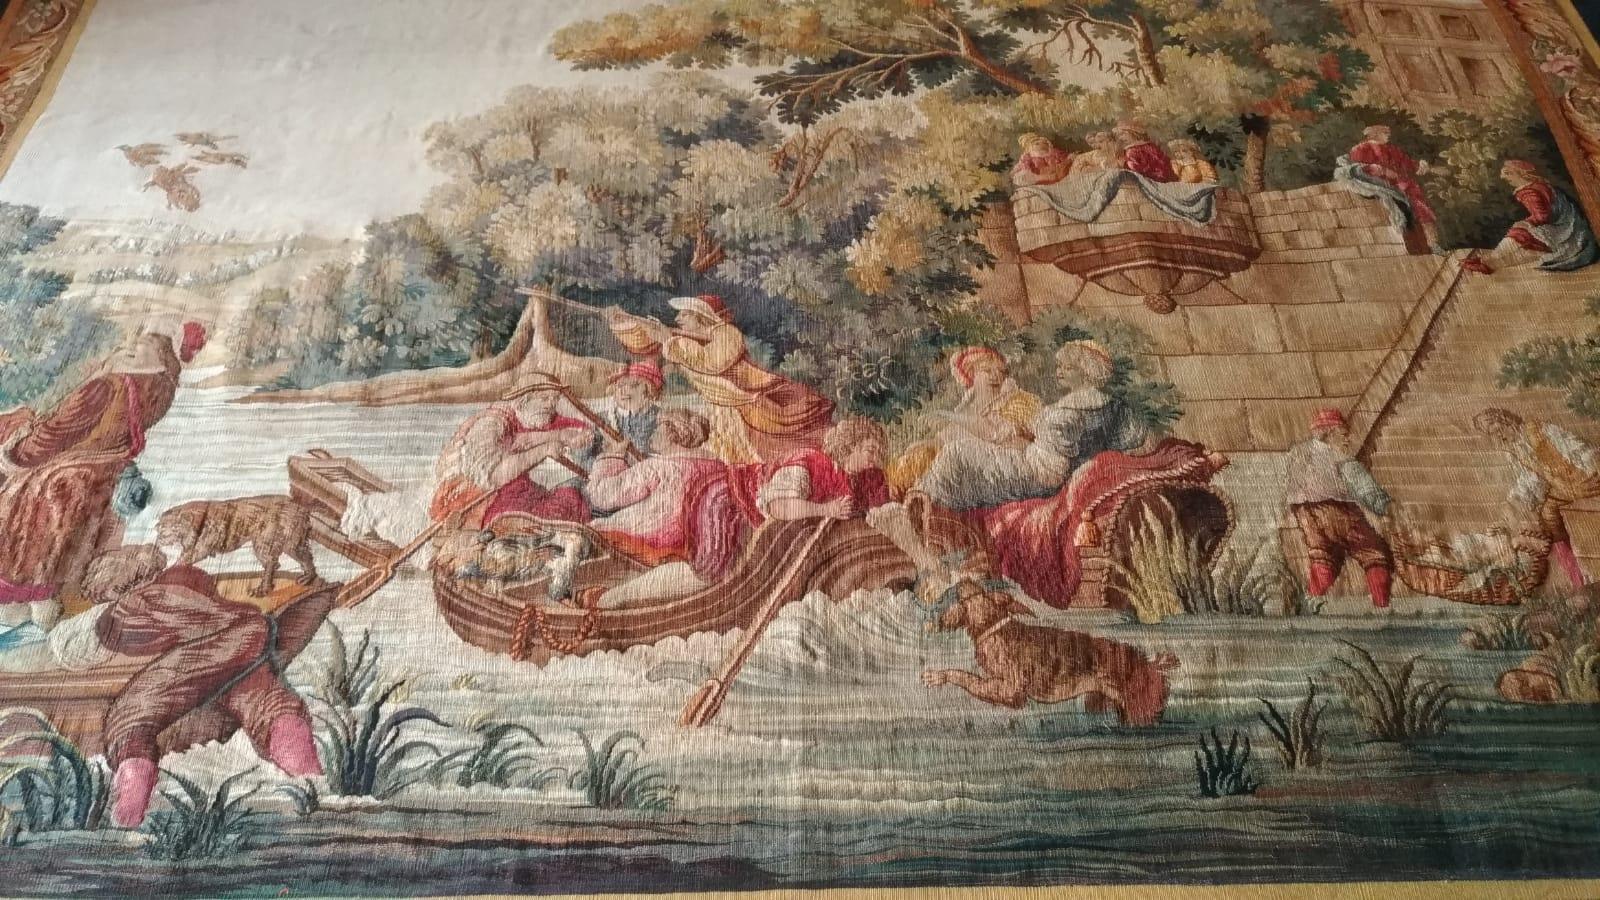 Tapestry of the Royal Manufacture of Aubusson of the 19th century.
Perfect state of preservation.
Price negotiable and free delivery.

Dimension: 200 cm x 140 cm.